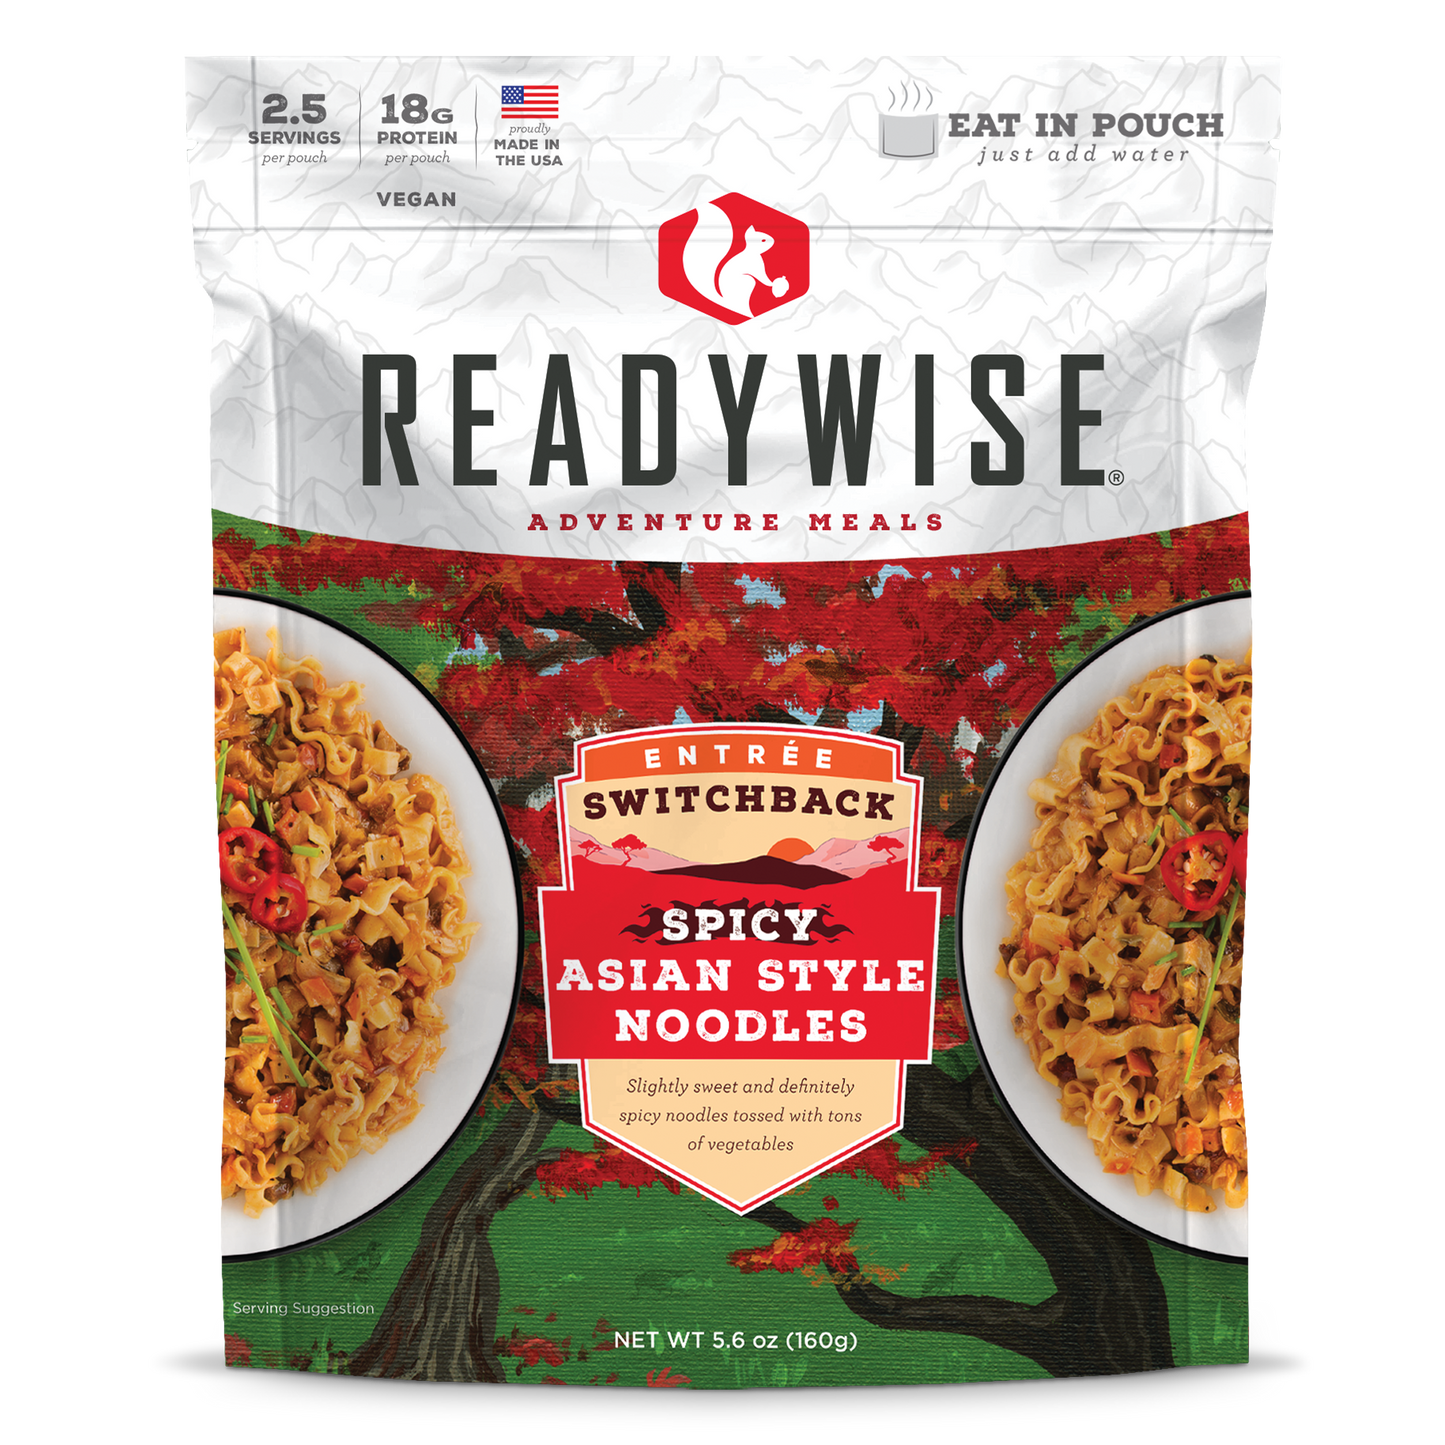 Adventure Meals: Switchback Spicy Asian Style Noodles